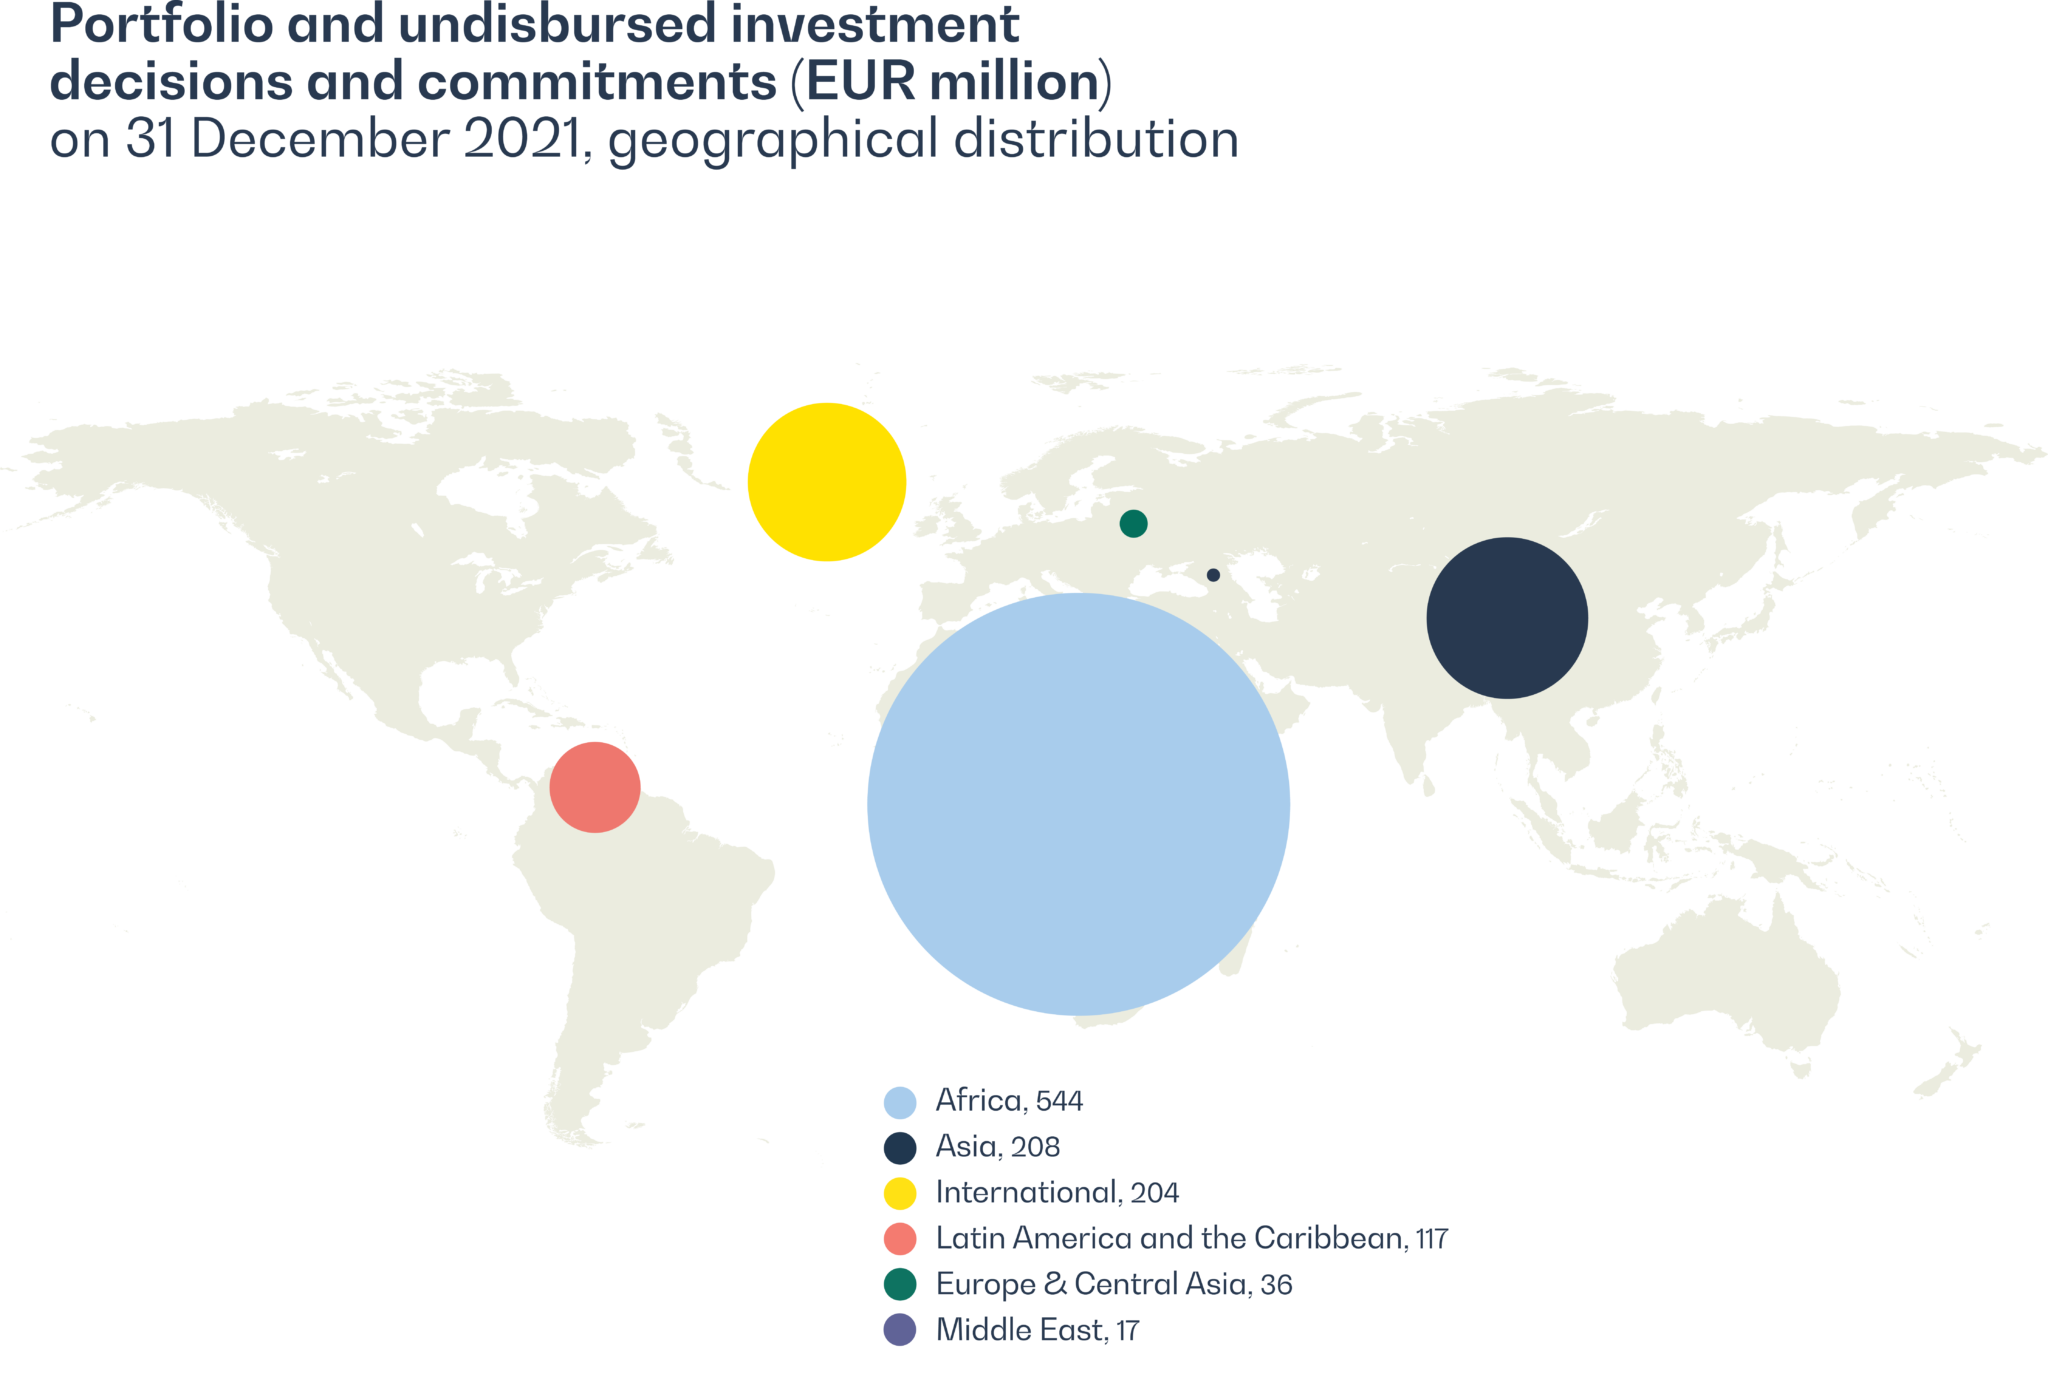 Geographical distribution of Finnfund's investments on a map